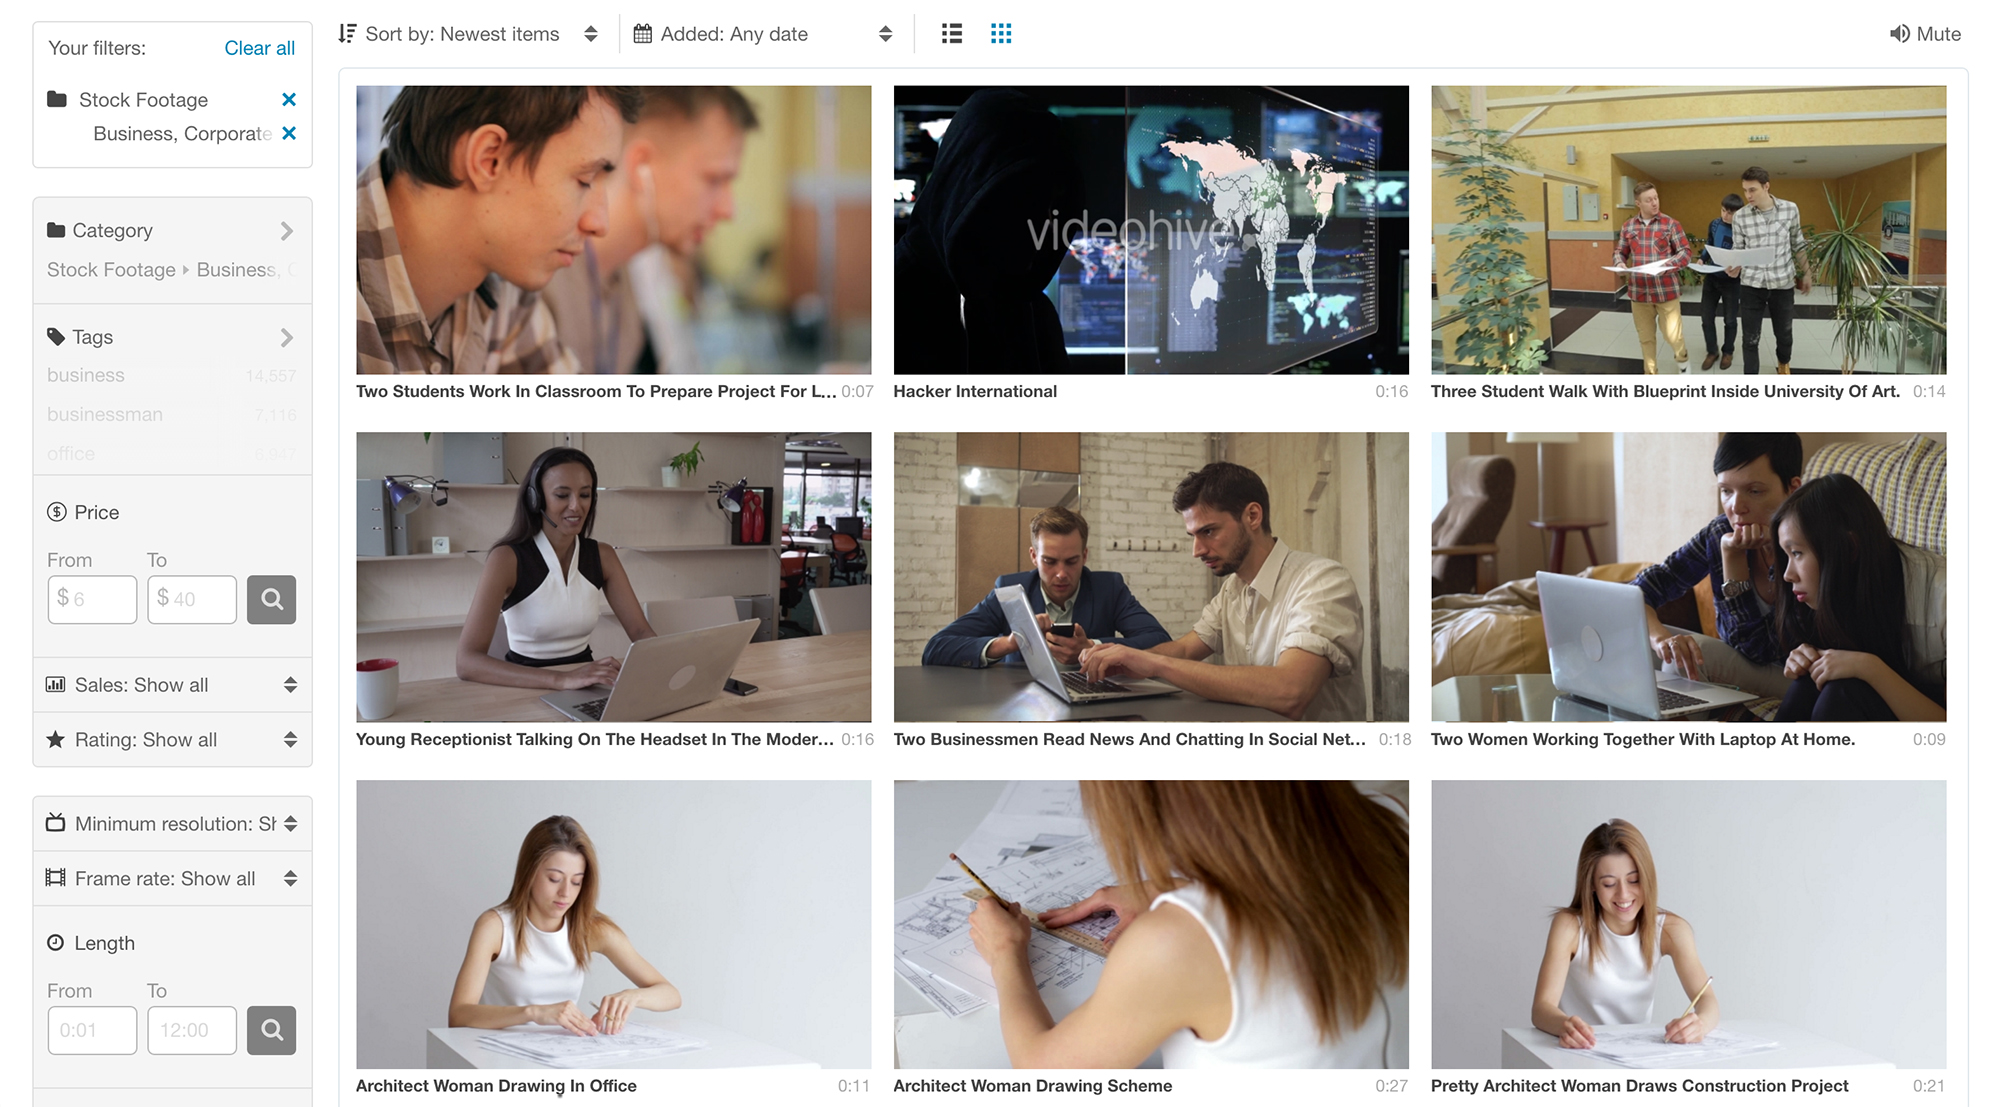 New VideoHive browsing experience